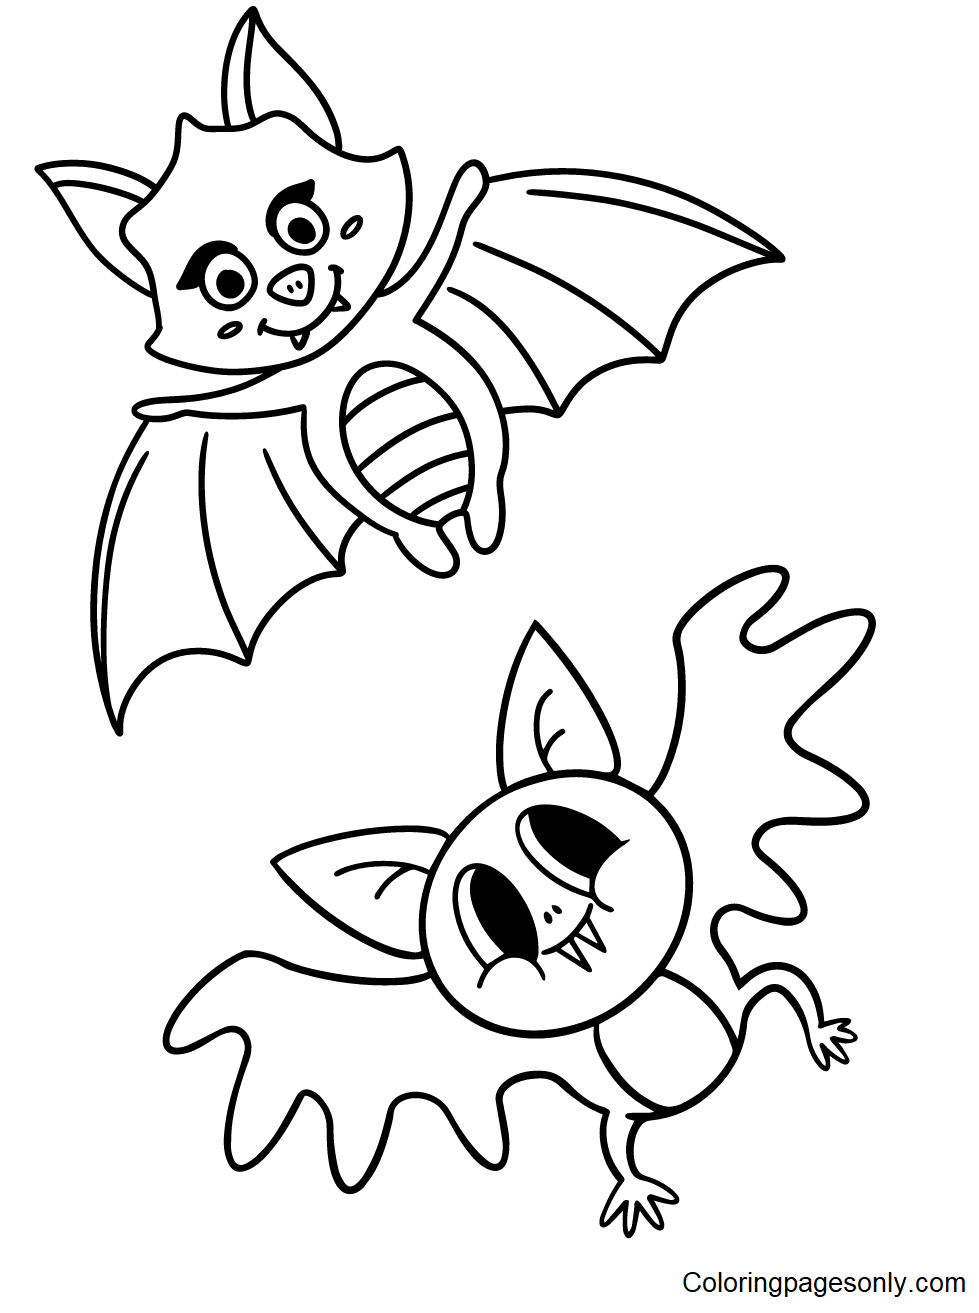 Two Bats Coloring Pages